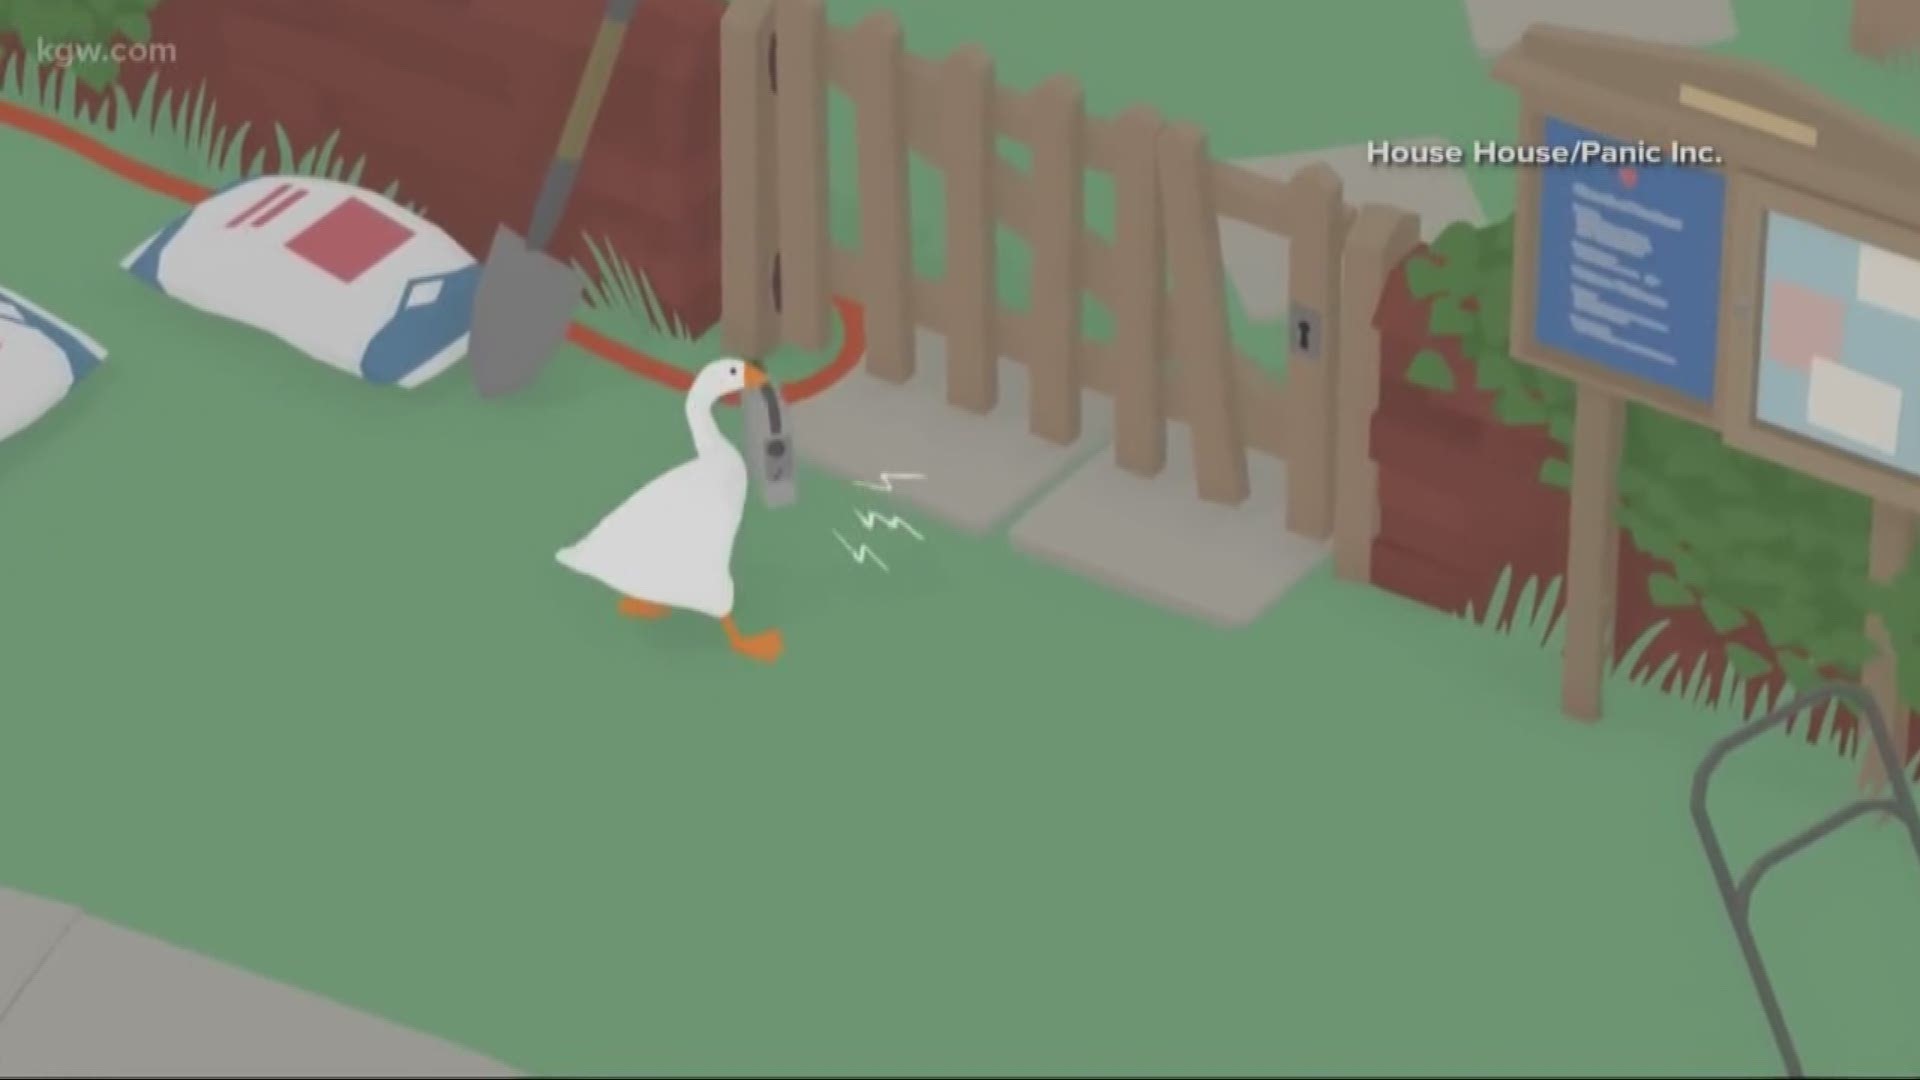 Panic is publishing a blockbuster video game called the "Untitled Goose Game." You play as a goose playing tricks on the unsuspecting public.